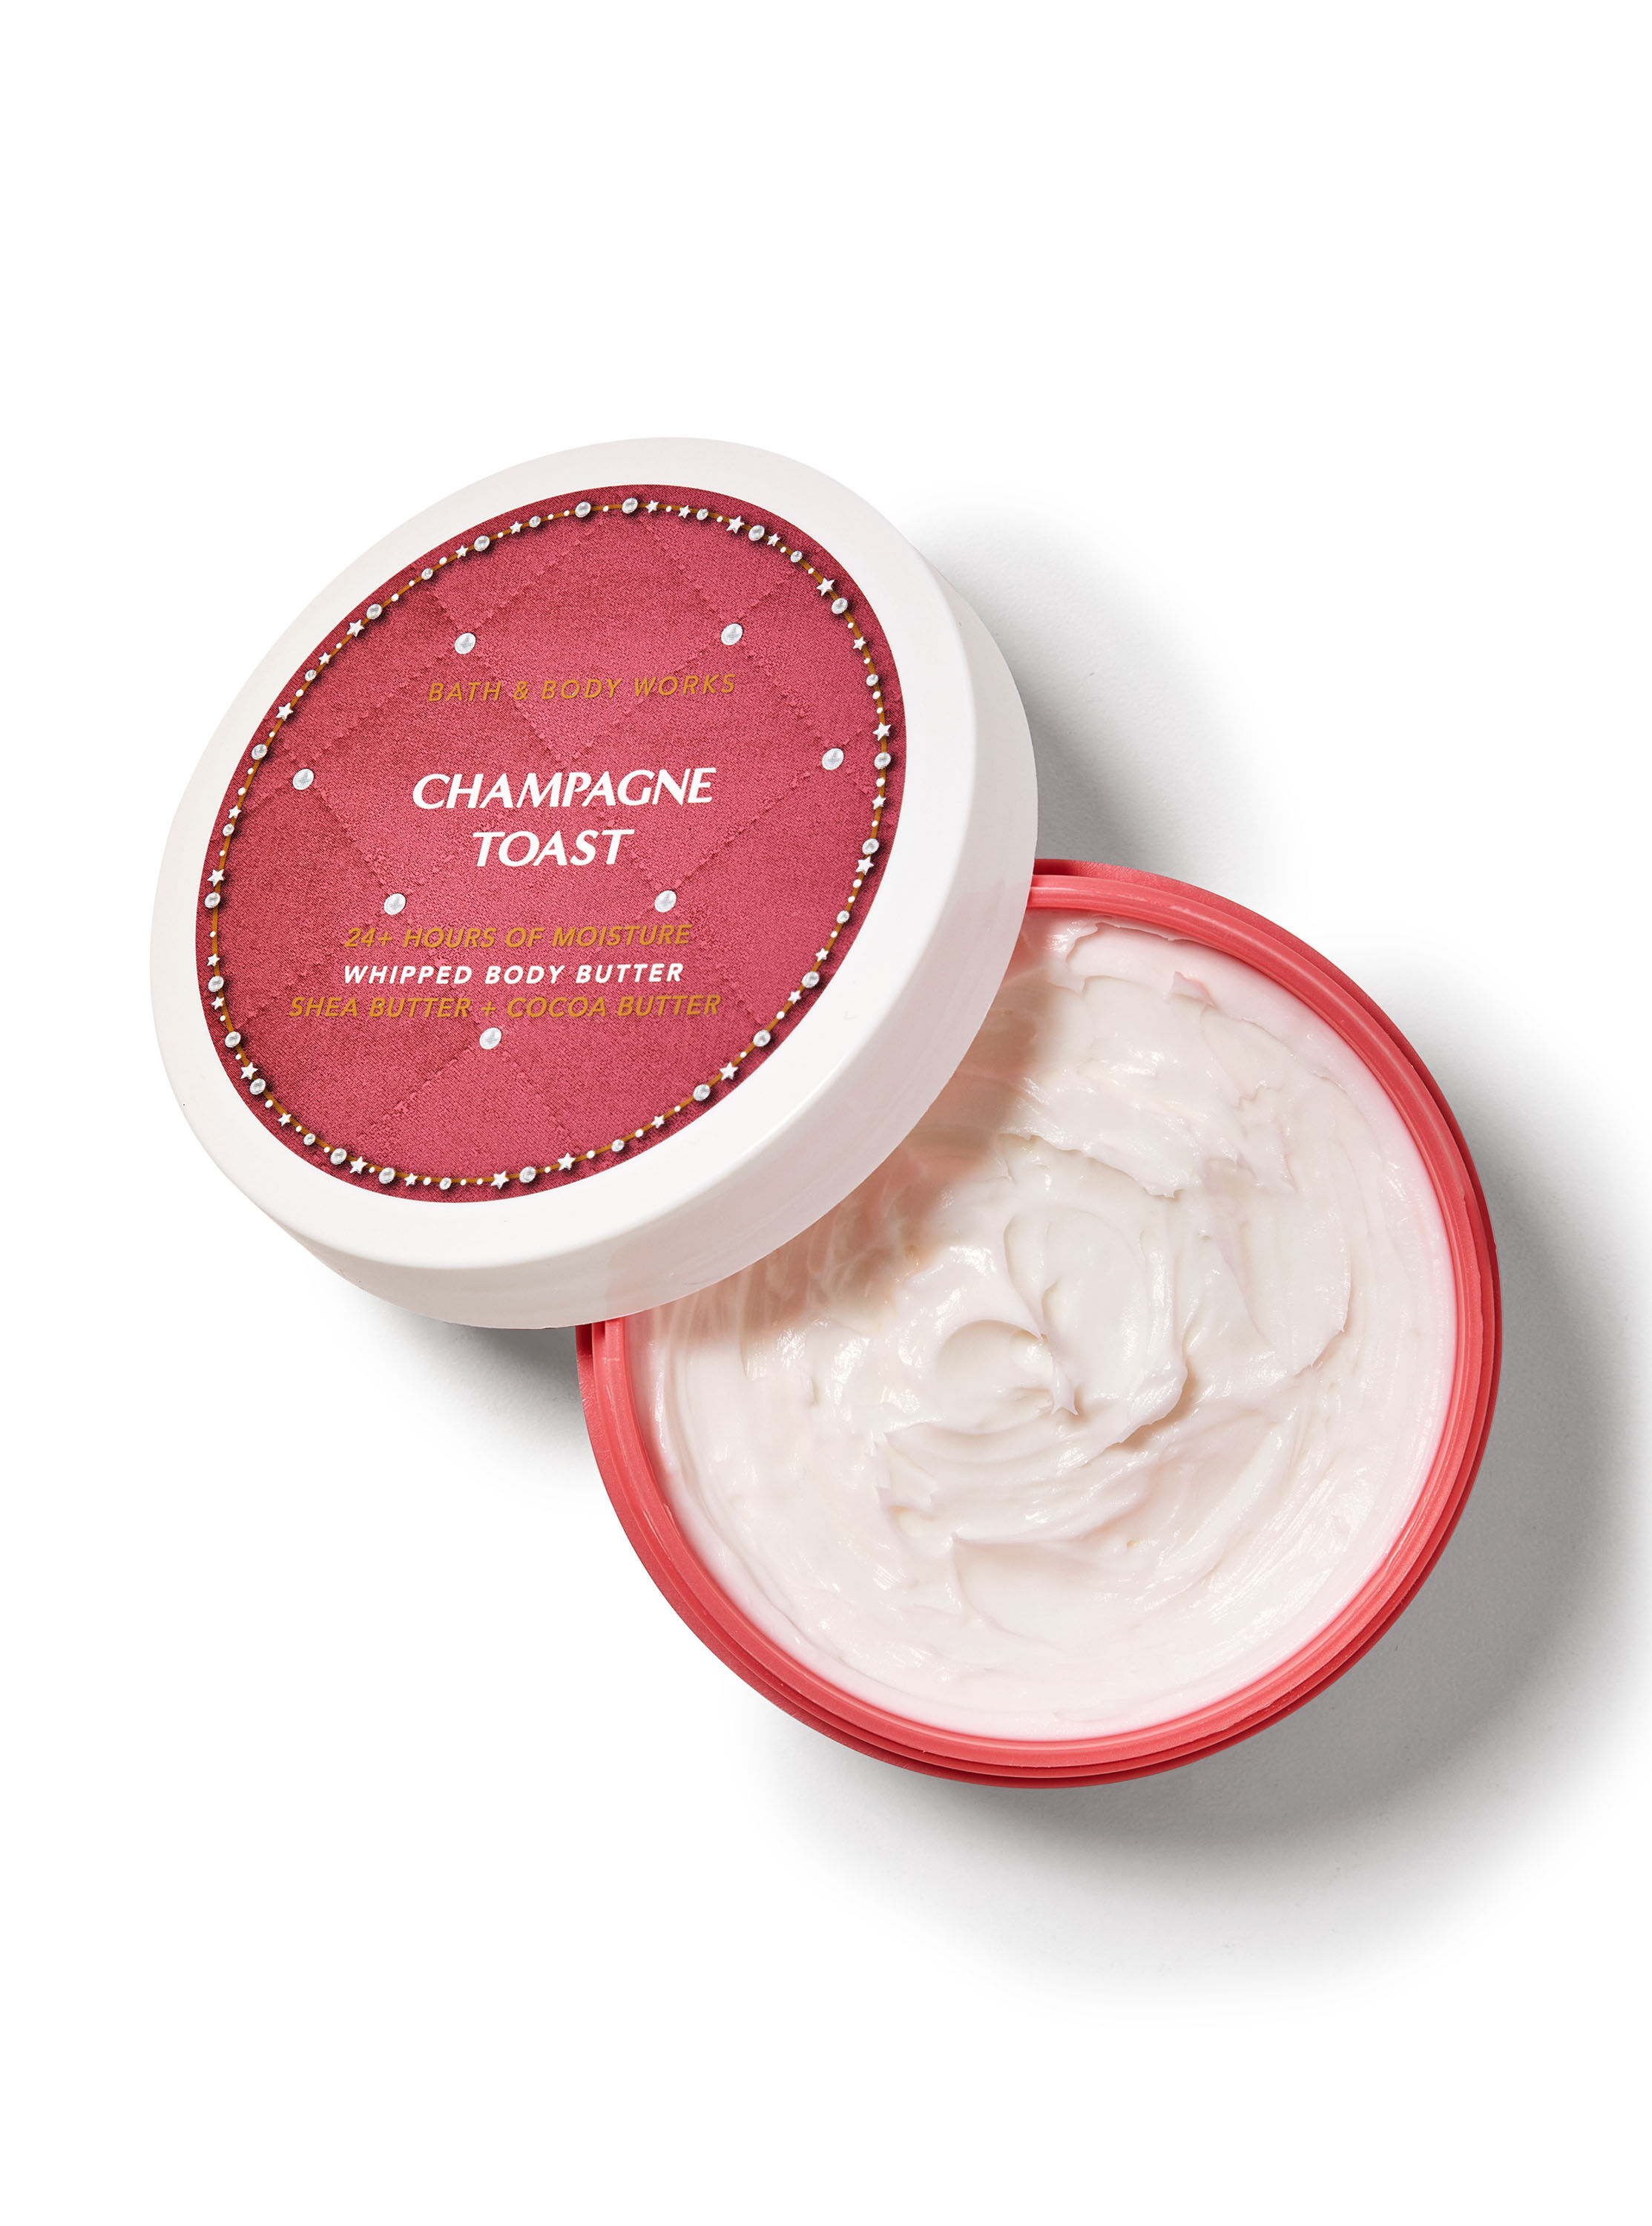 Champagne Toast Whipped Body Butter | Bath & Body Works